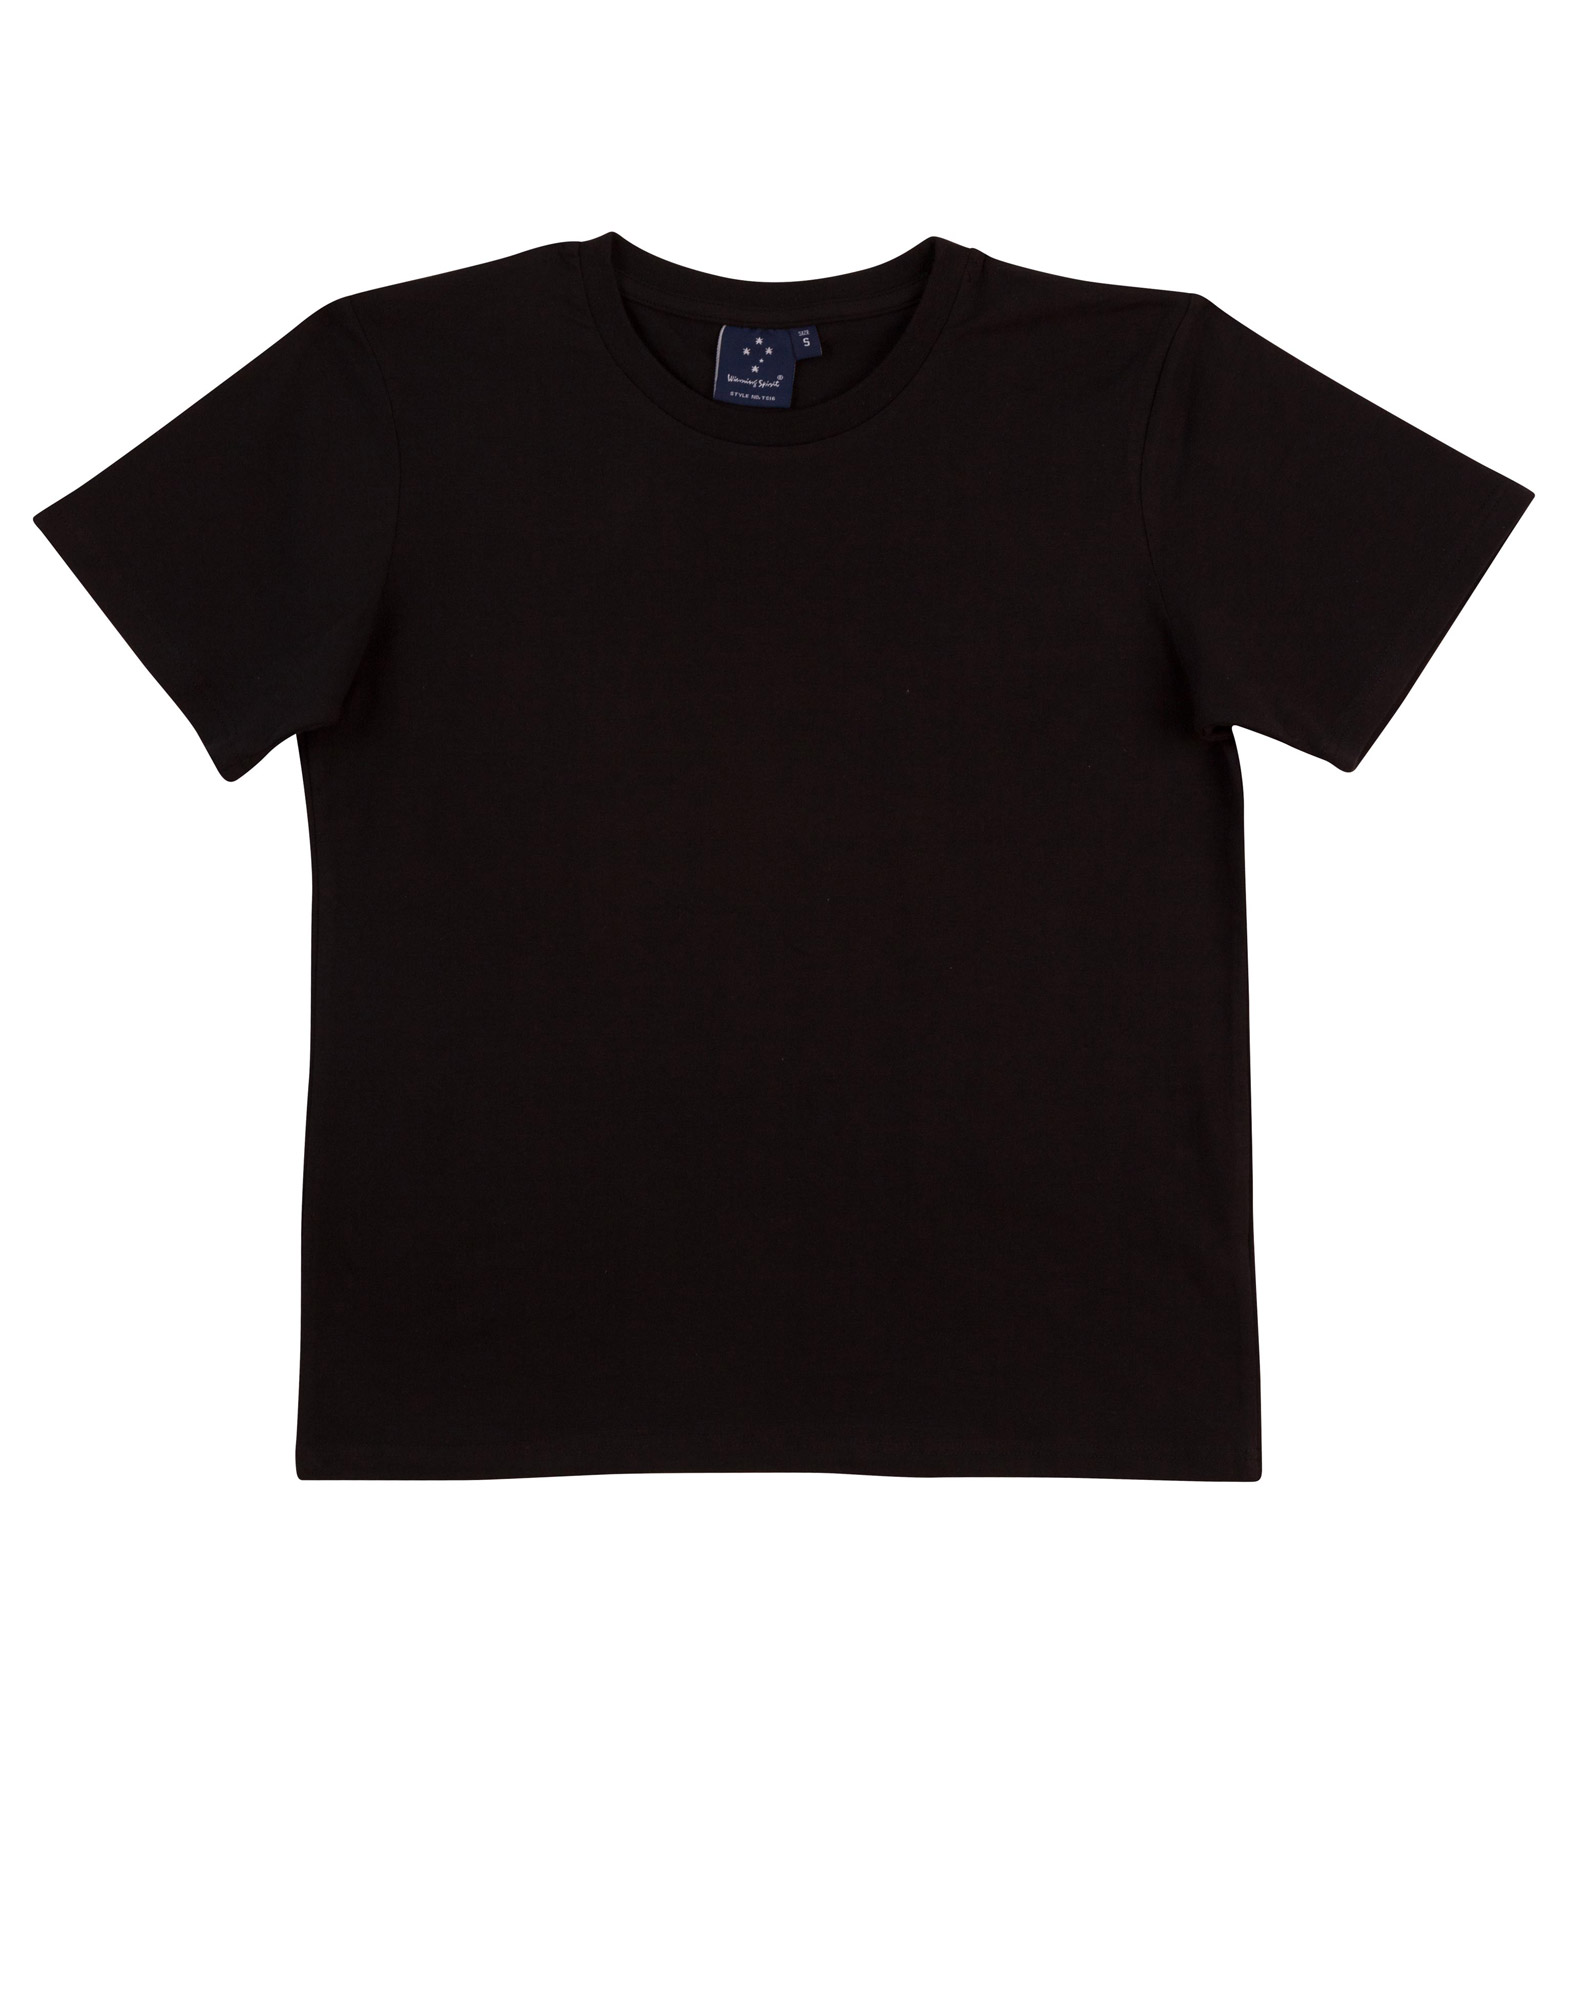 Custom (Black) Mens Super Fitted Cotton Tee Shirts Online in Australia